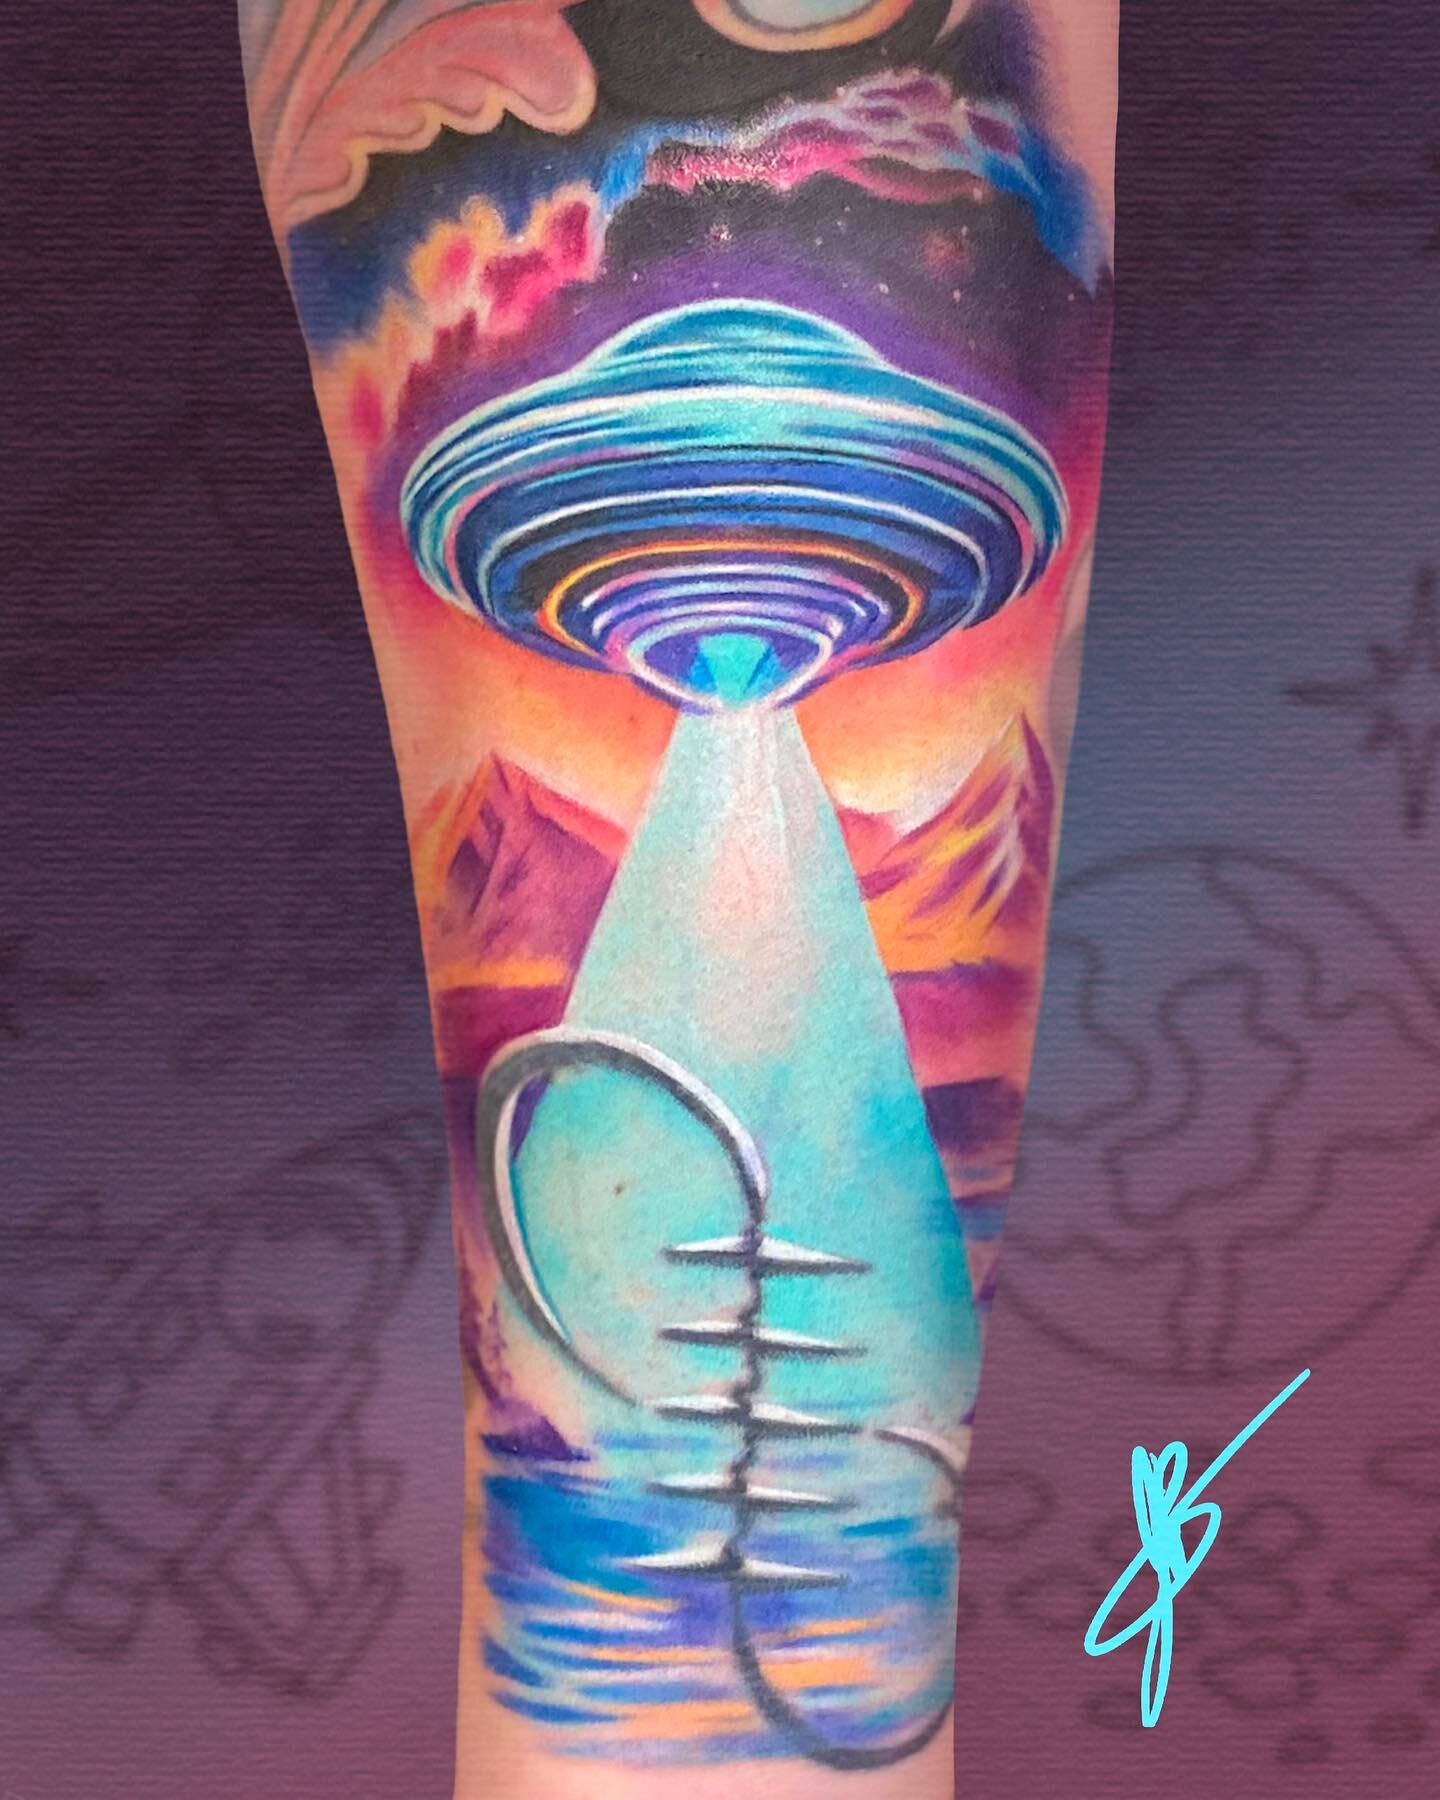 The heartbeat / infinity symbol was already on her wrist, but she wanted a ufo for her son, lovingly nicknamed &quot;Alien Overlord,&quot; so we reimagined it as a 3D object being beamed up by the ship. I love the neon color palette.